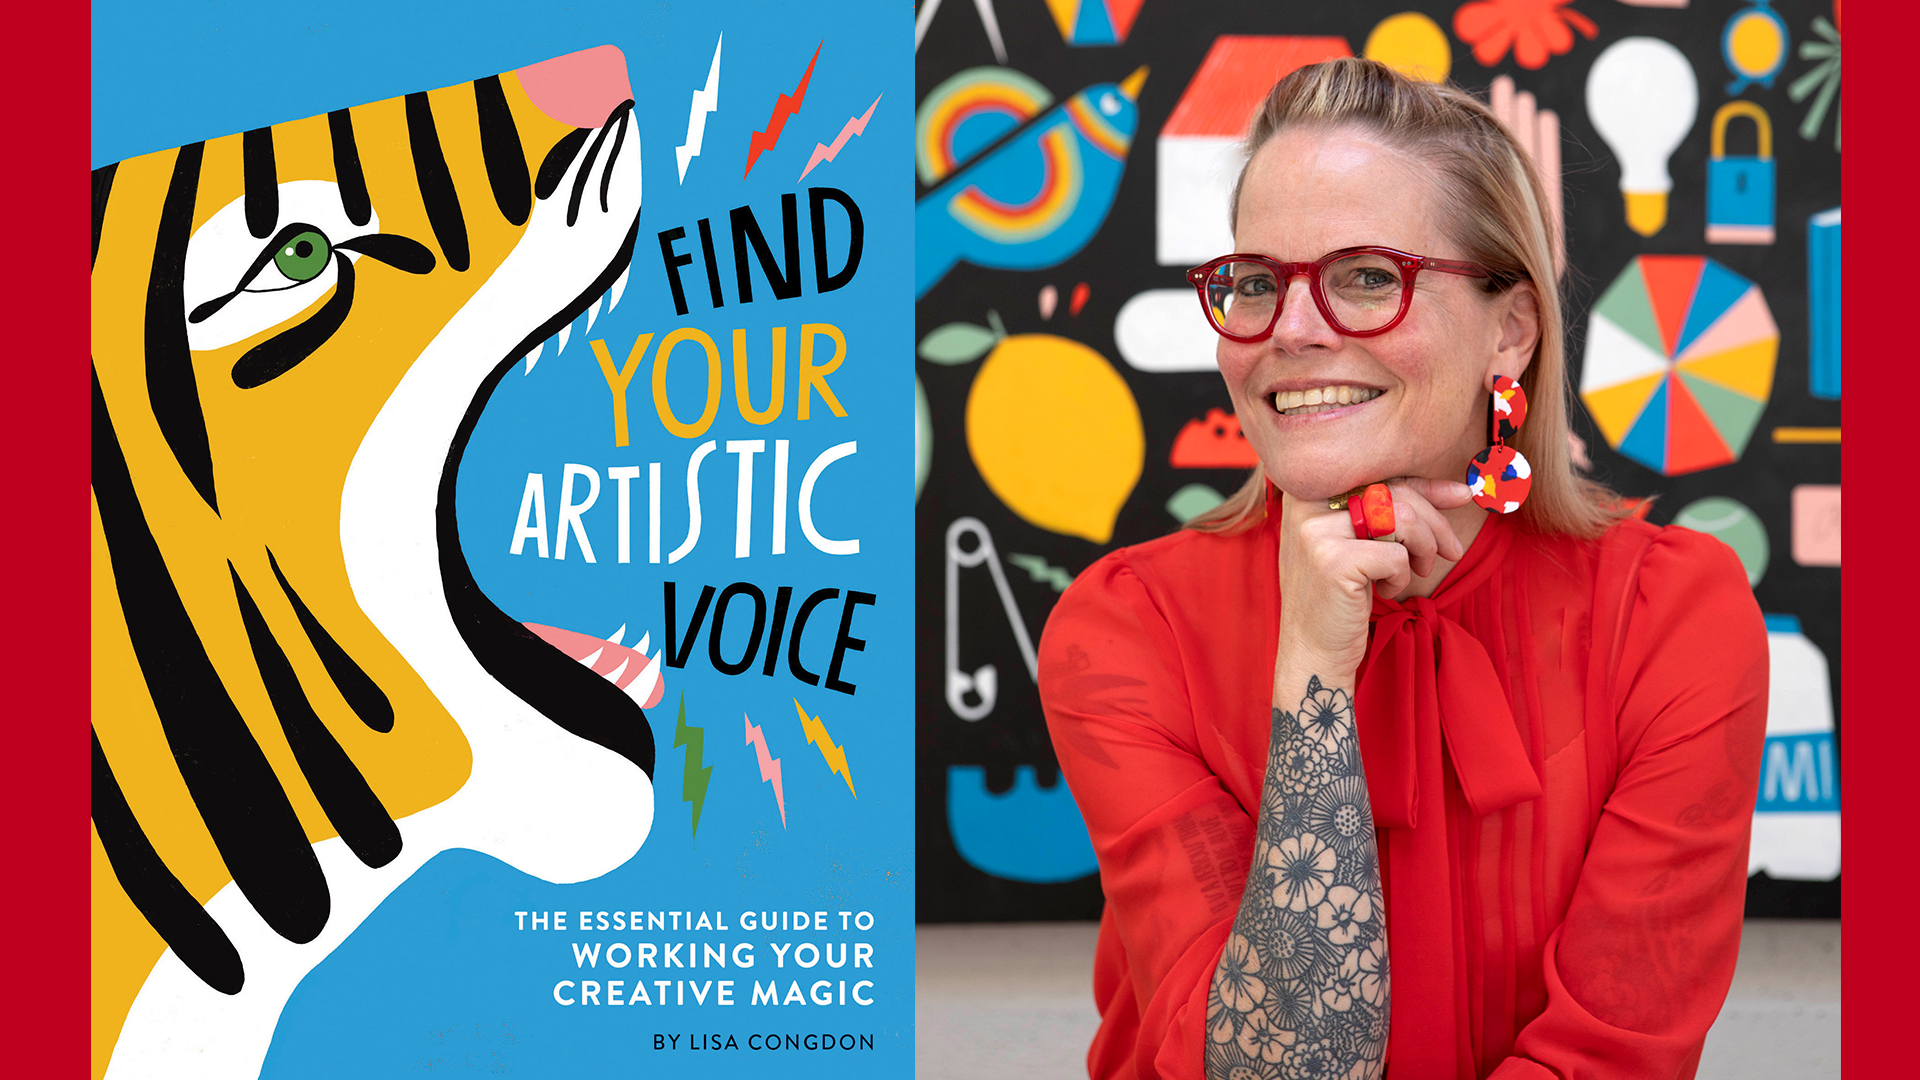 Find Your Artistic Voice The Essential Guide to Working Your Creative Magic